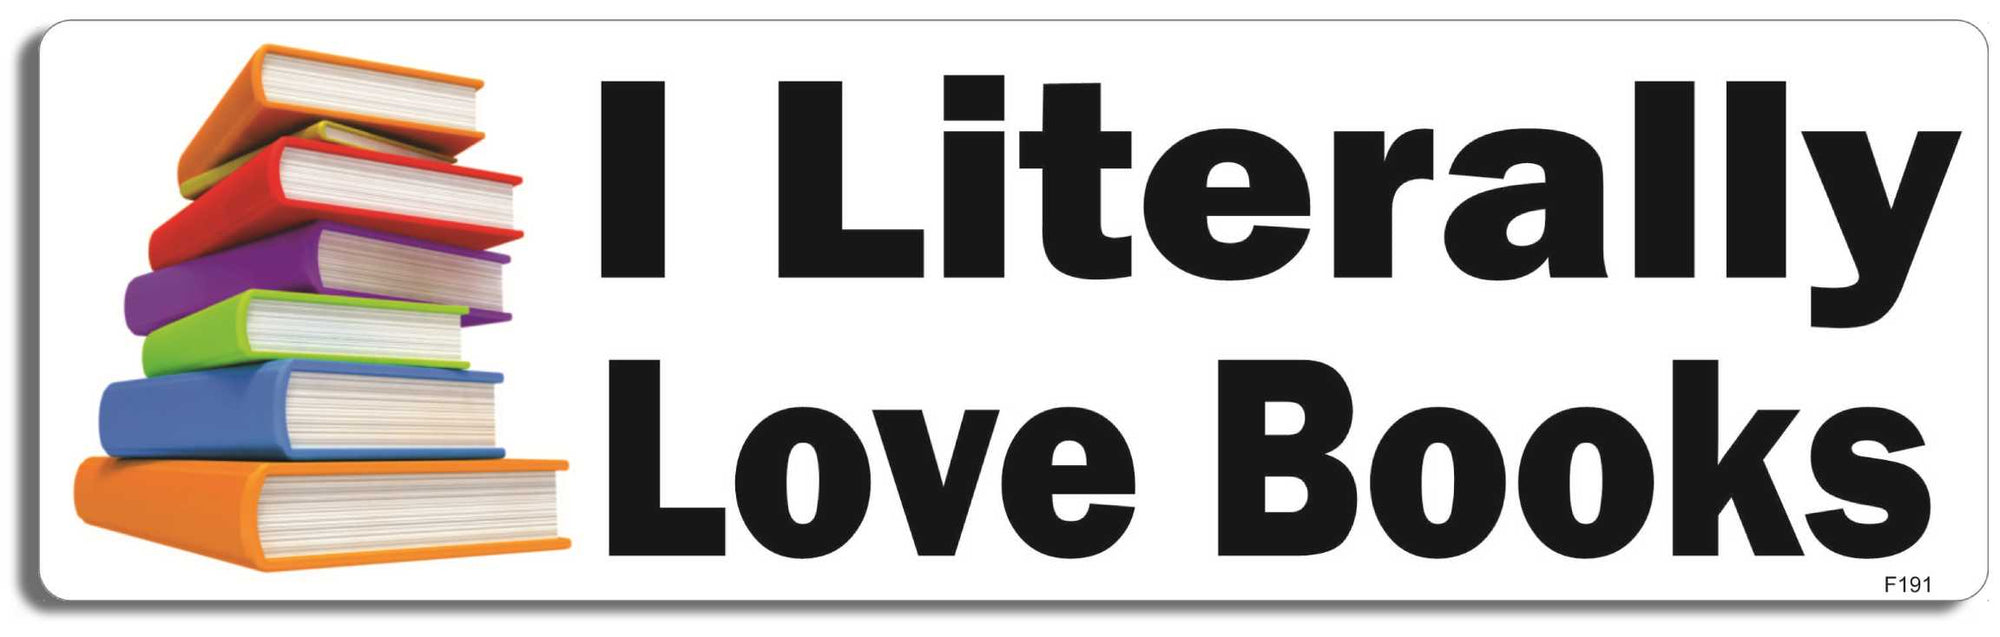 I Literally Love Books - 3" x 10" -  Decal Bumper Sticker-funny Bumper Sticker Car Magnet I Literally Love Books-  Decal for carsBook lover, clever, educational